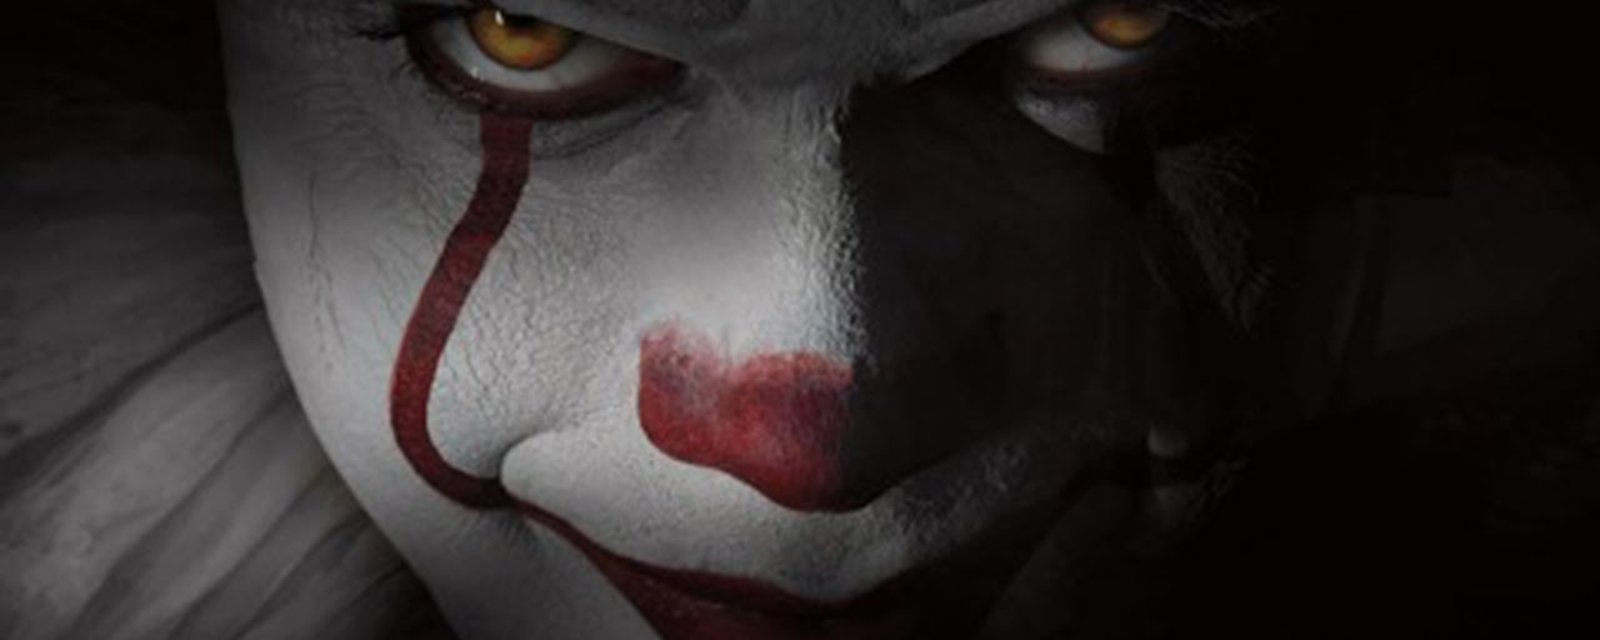 NHL Mascot dresses up as scary clown from IT